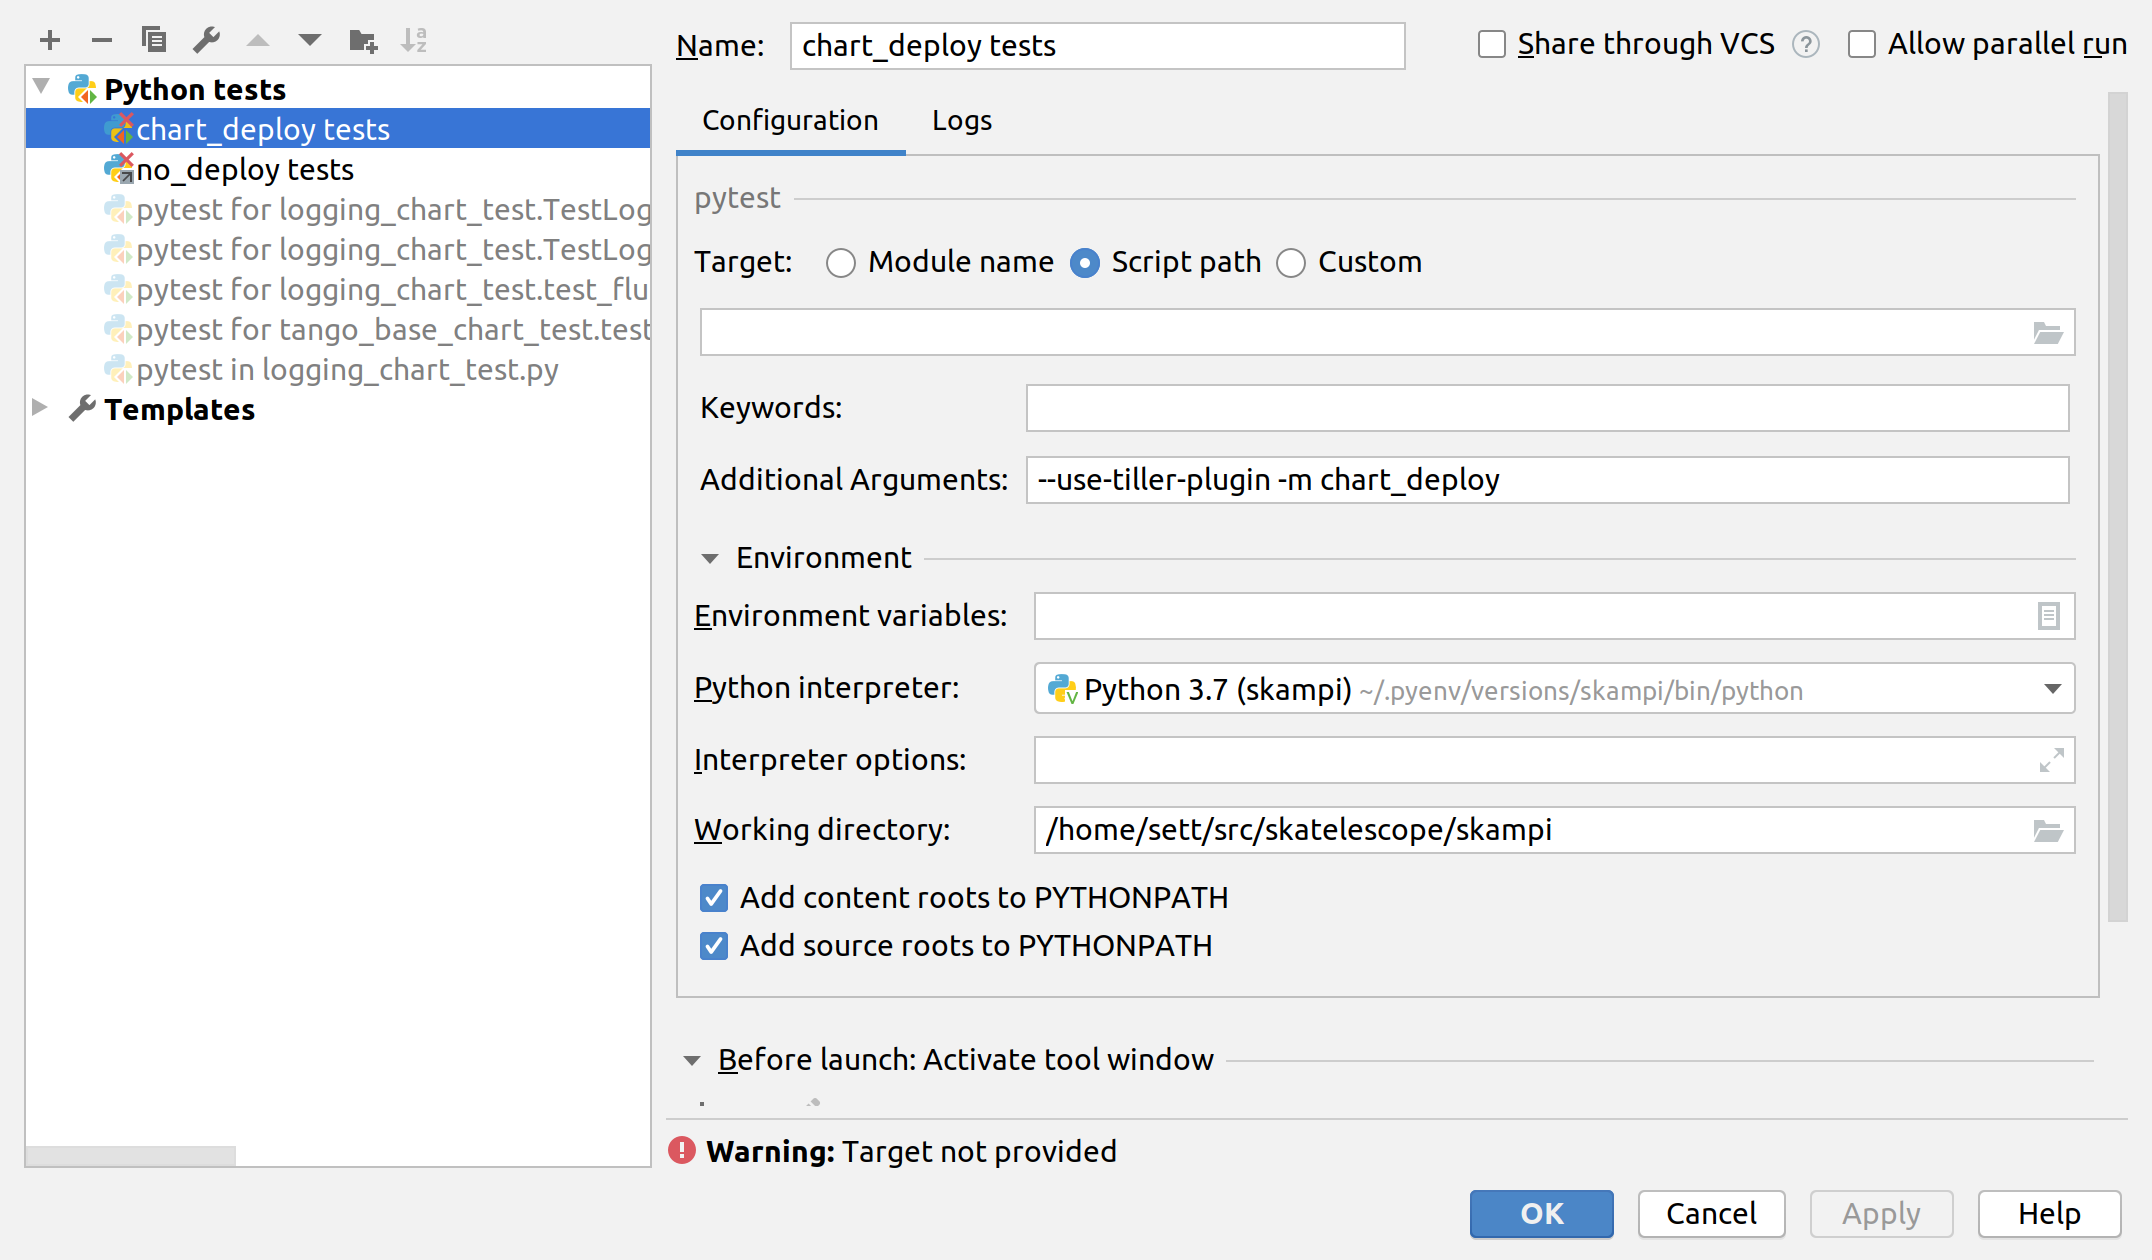 PyCharm config for running chart_deploy tests